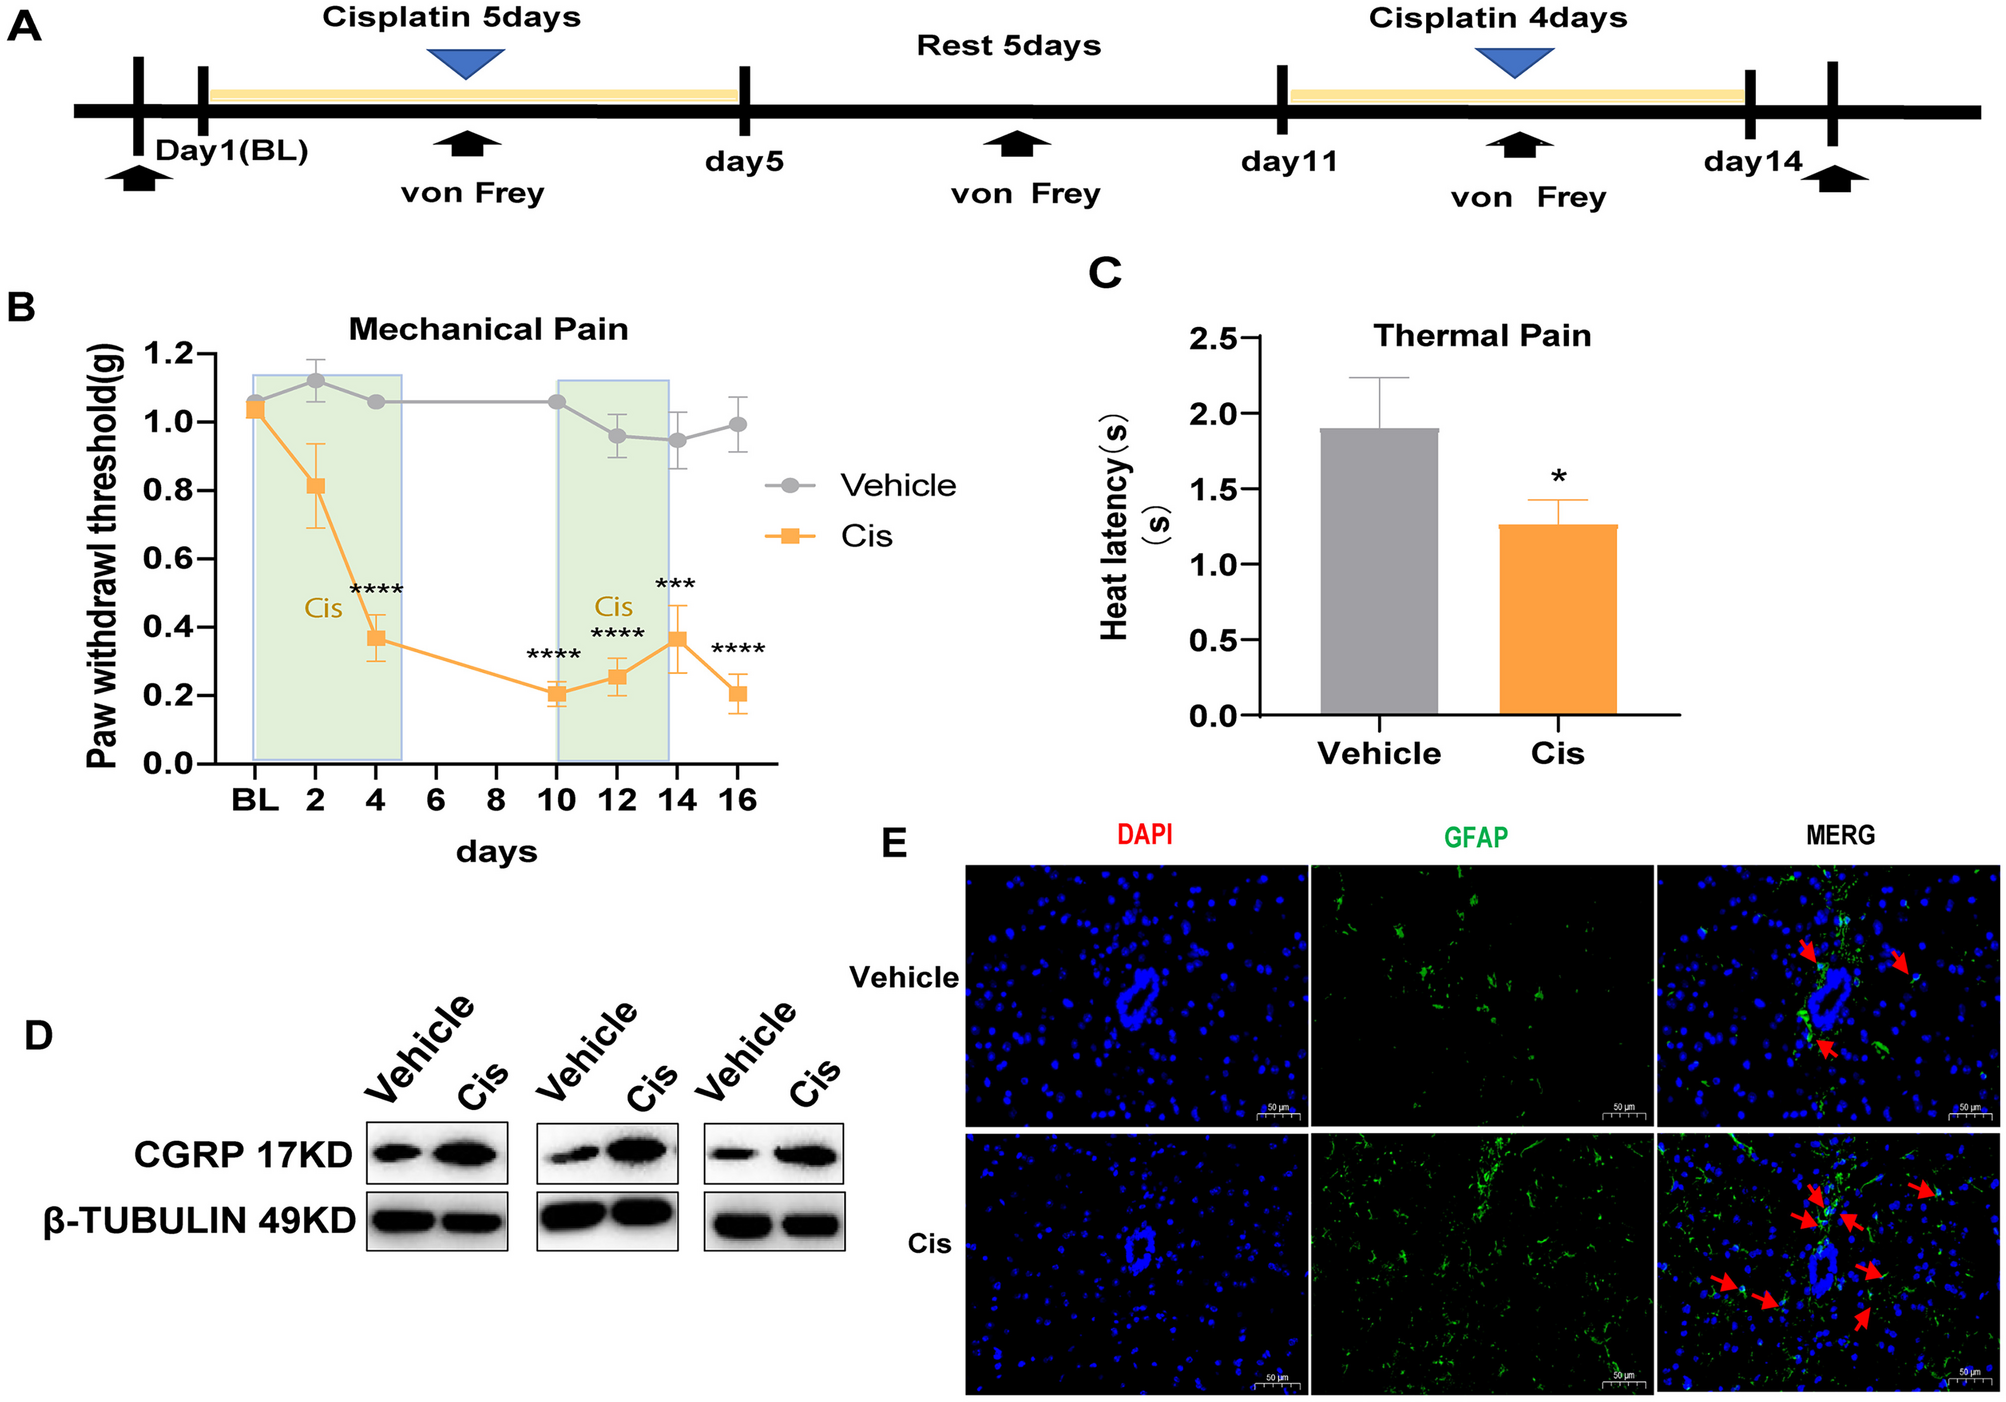 Monoclonal Antibody Targeting CGRP Relieves Cisplatin-Induced Neuropathic Pain by Attenuating Neuroinflammation